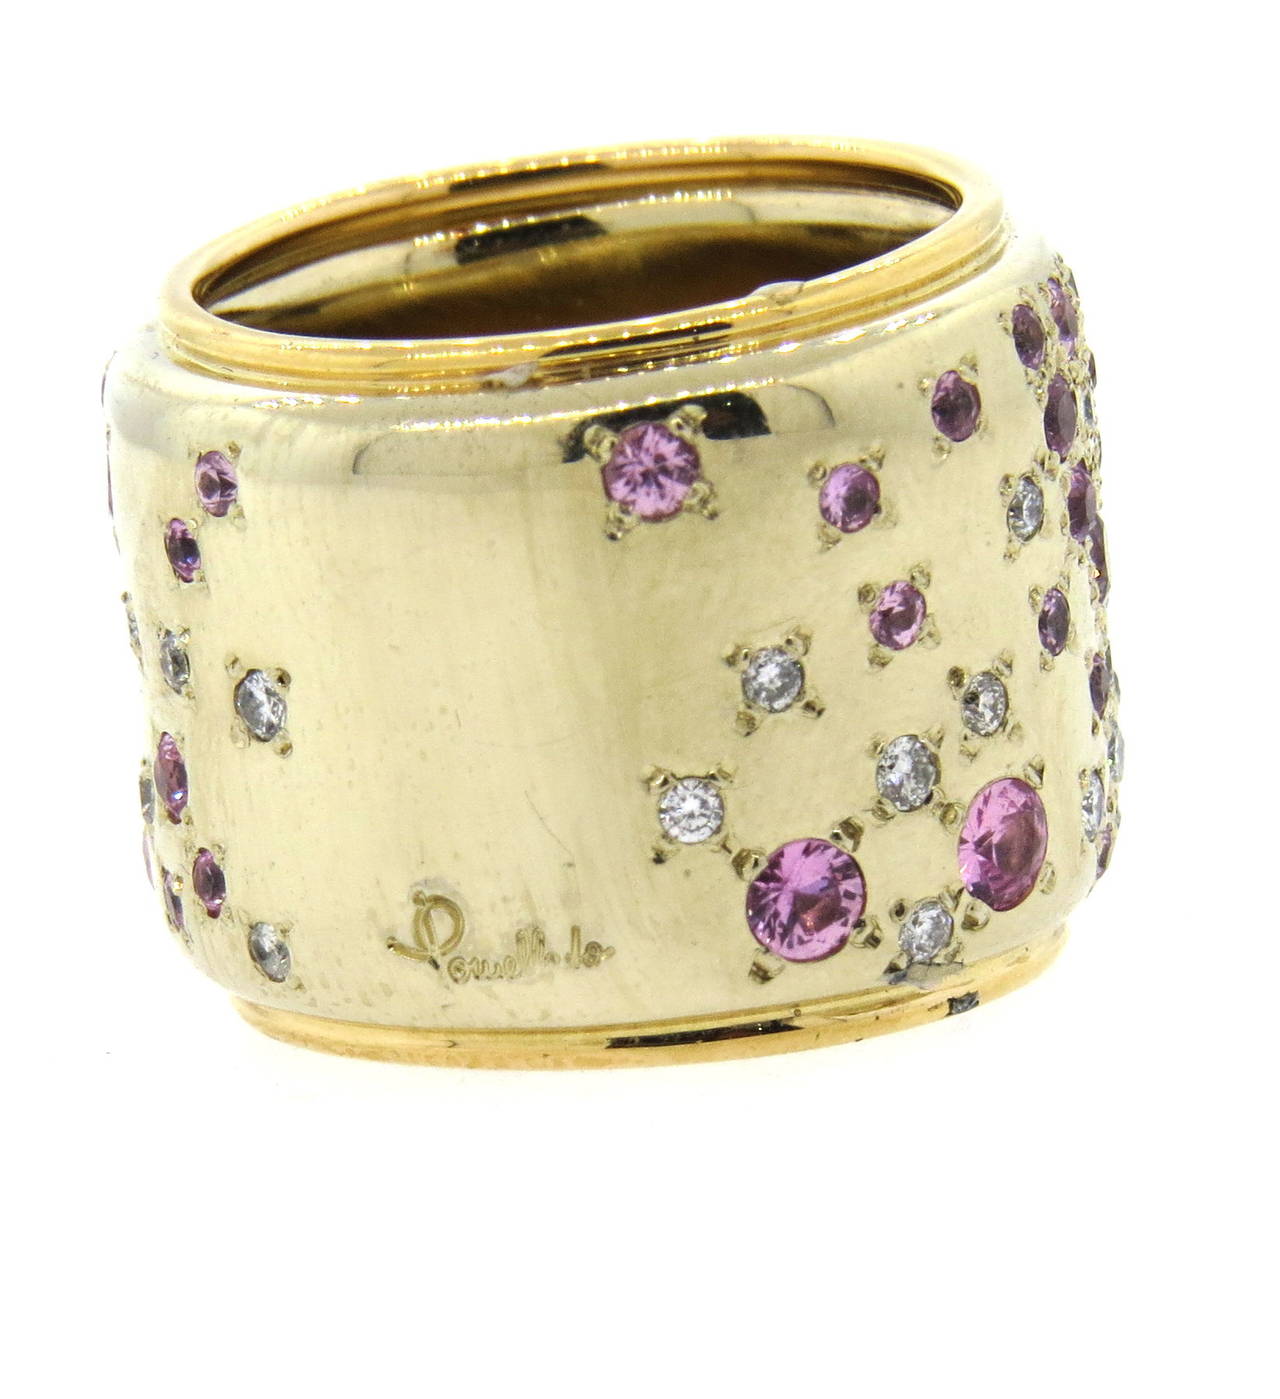 Large 18k gold wide band ring by Pomellato from Sabbia collection, adorned with approx. 0.60ctw in diamonds and pink sapphires. Ring is a size 6 3/4 and is 19mm wide. Marked 750, Pomellato and Italian gold mark. Weight of the piece - 33.9 grams